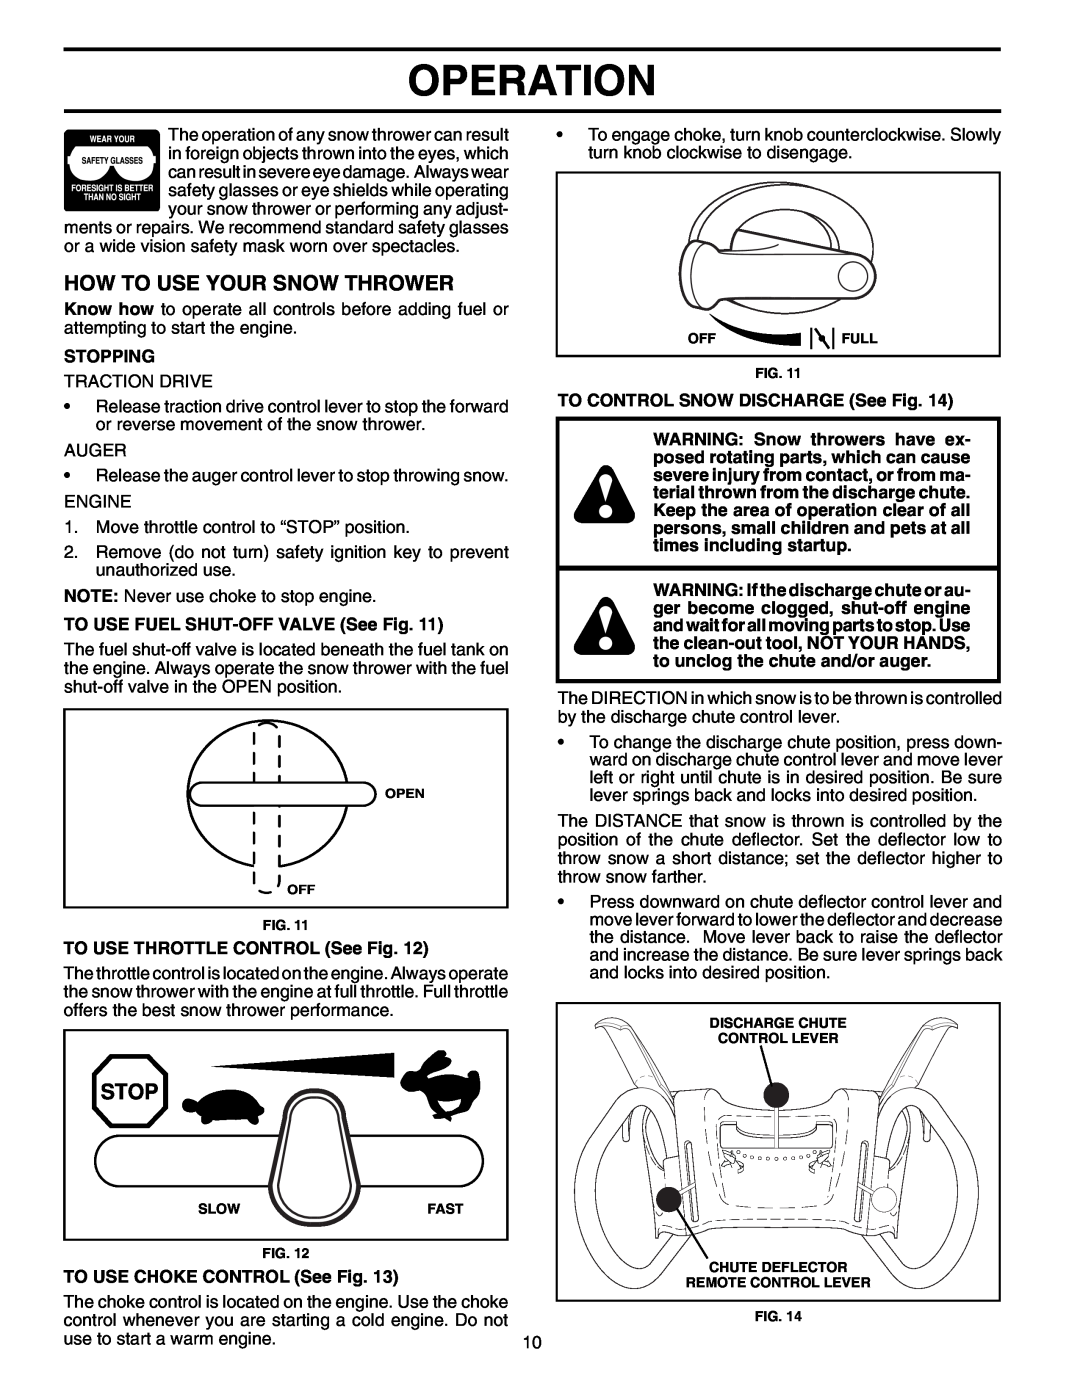 Husqvarna 8527SBEB owner manual How To Use Your Snow Thrower, Operation, Stopping, TO USE FUEL SHUT-OFF VALVE See Fig 